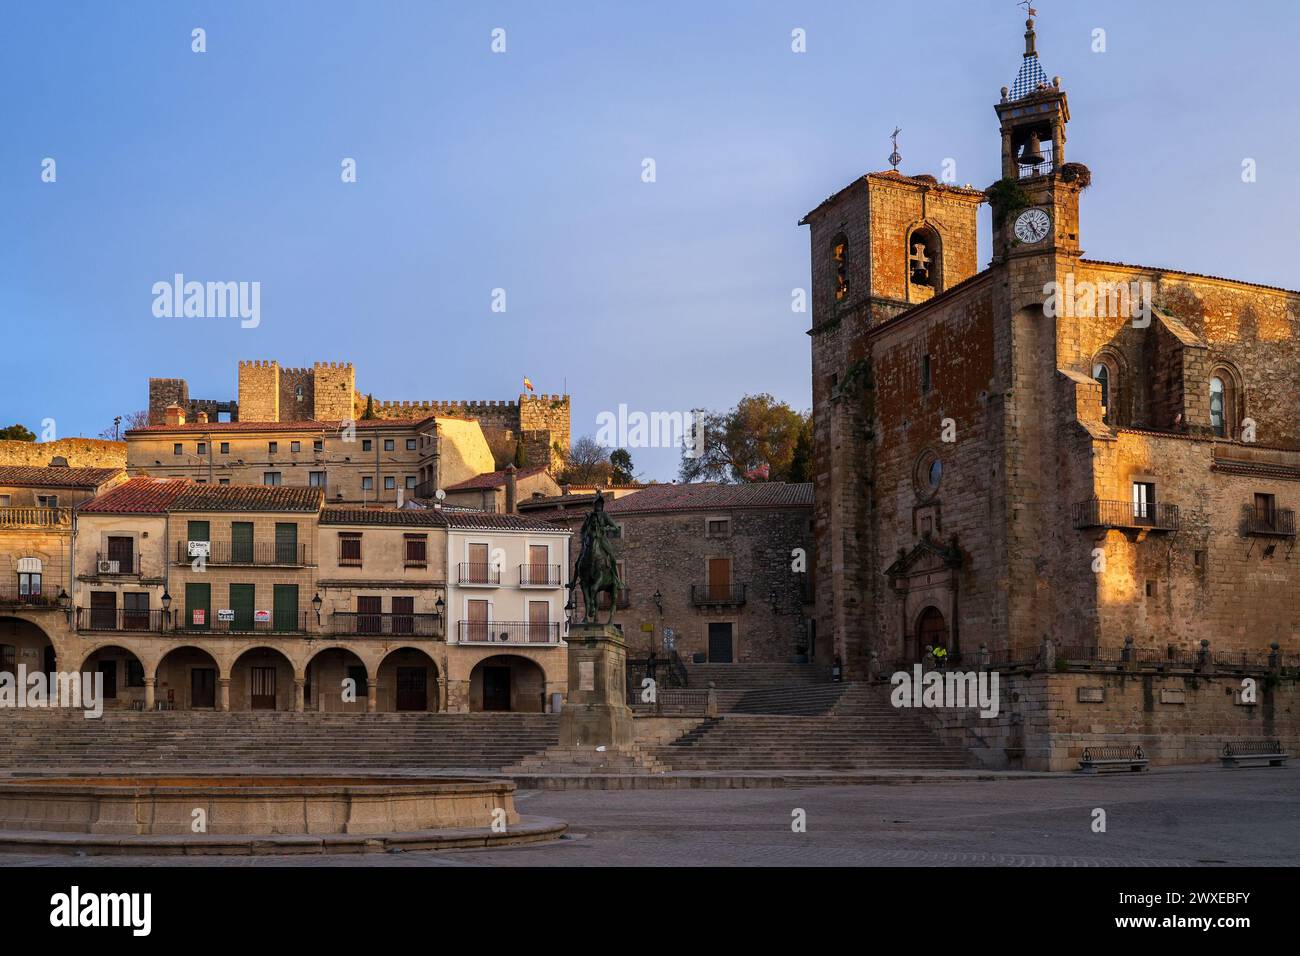 Trujillo Plaza Mayor surrounded by palaces and the Saint Martin of Tours church. The medieval castle was a location for Game of Thrones. Caceres. Stock Photo